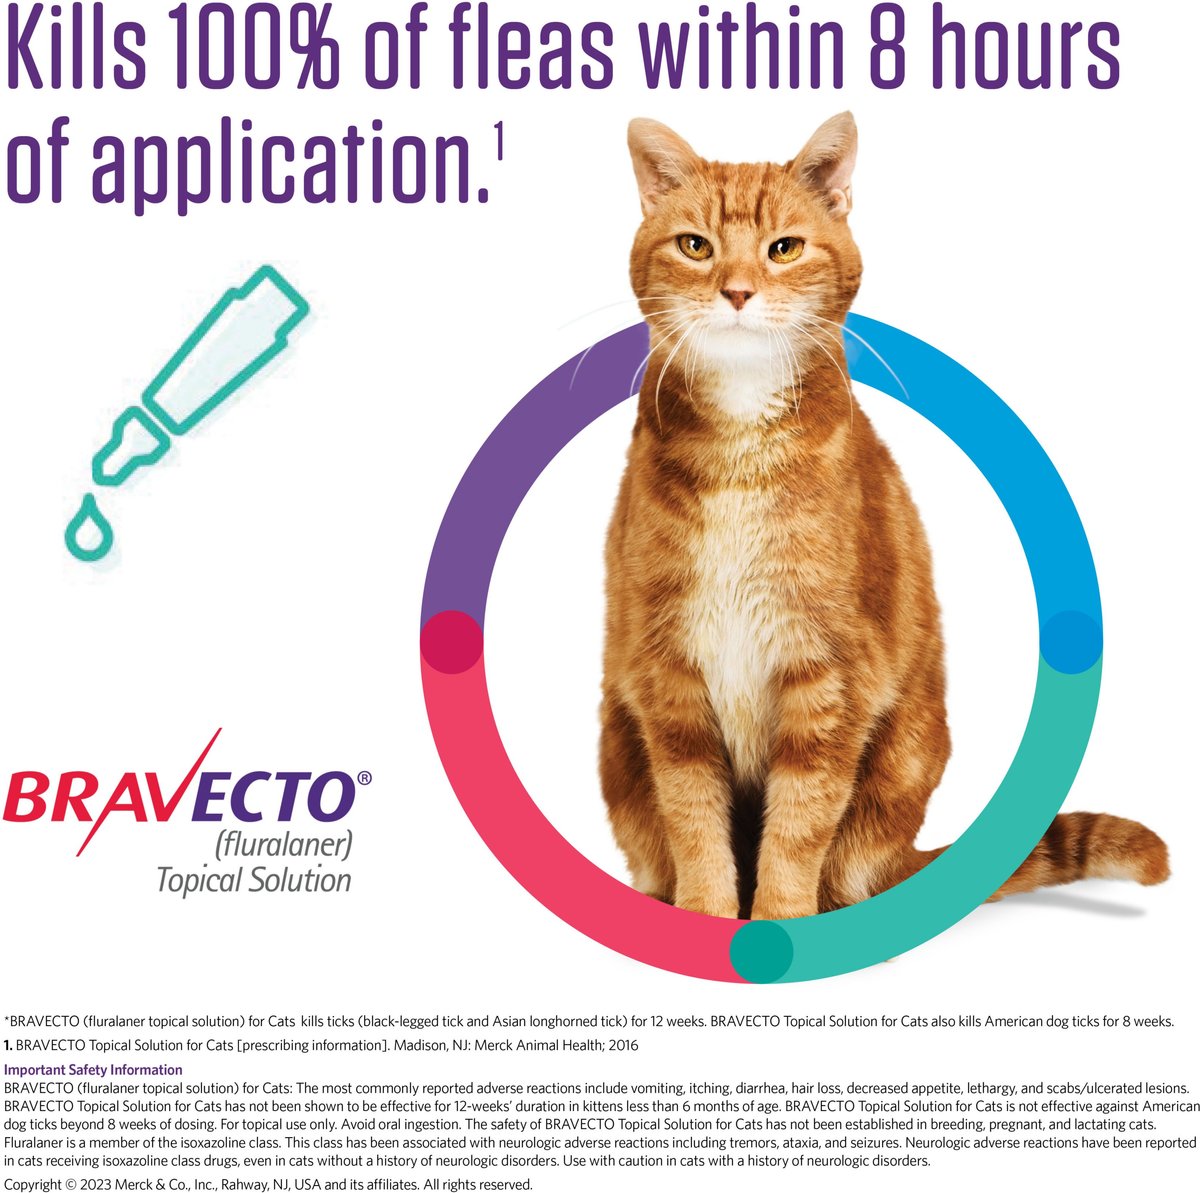 BRAVECTO Topical Solution for Cats, 6.2-13.8 lbs, (Blue Box), 1 Dose  (12-wks. supply) 